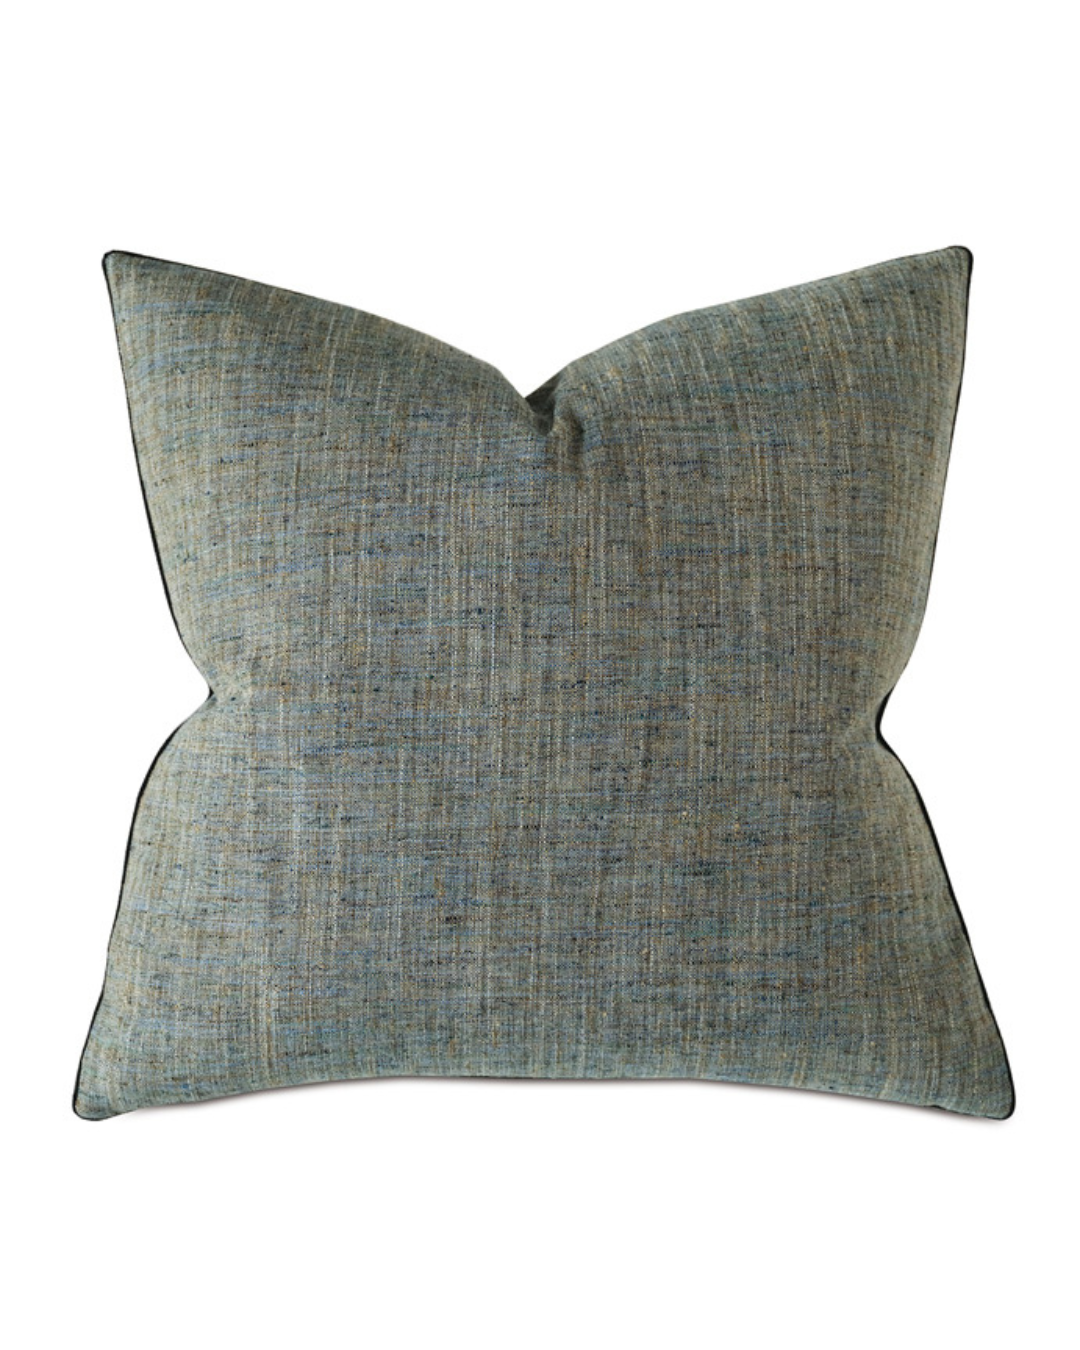 A WOVEN DECORATIVE PILLOW IN TEAL 22x22 from Eastern Accents with a textured fabric in a mix of blue and gray shades. The pillow has a slight V-shape at the top, indicating its softness and plushness. Edged with darker piping, it features a down feather insert for added comfort and a subtle contrast to its multicolored design.